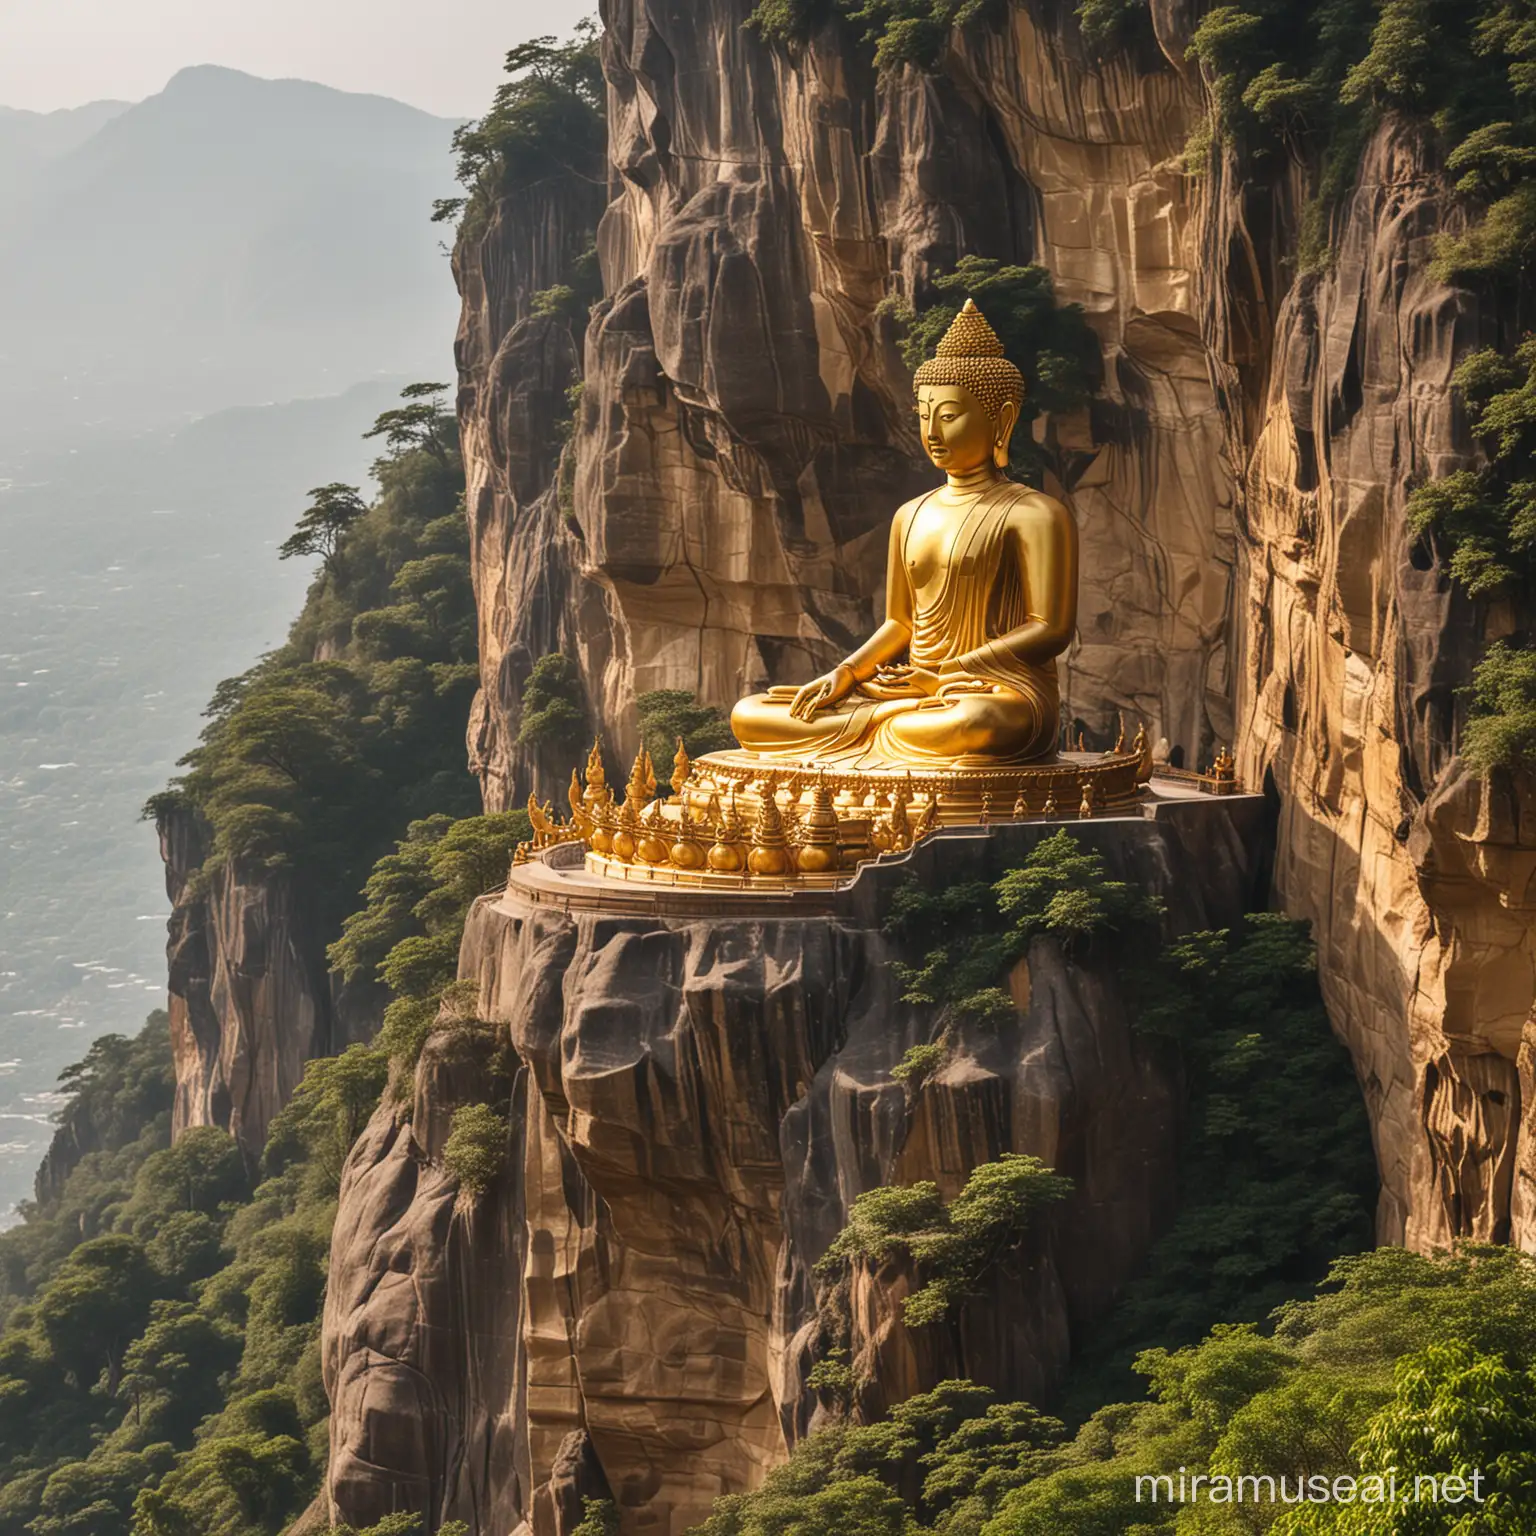 Majestic Golden Buddha Statue Perched on a Cliff